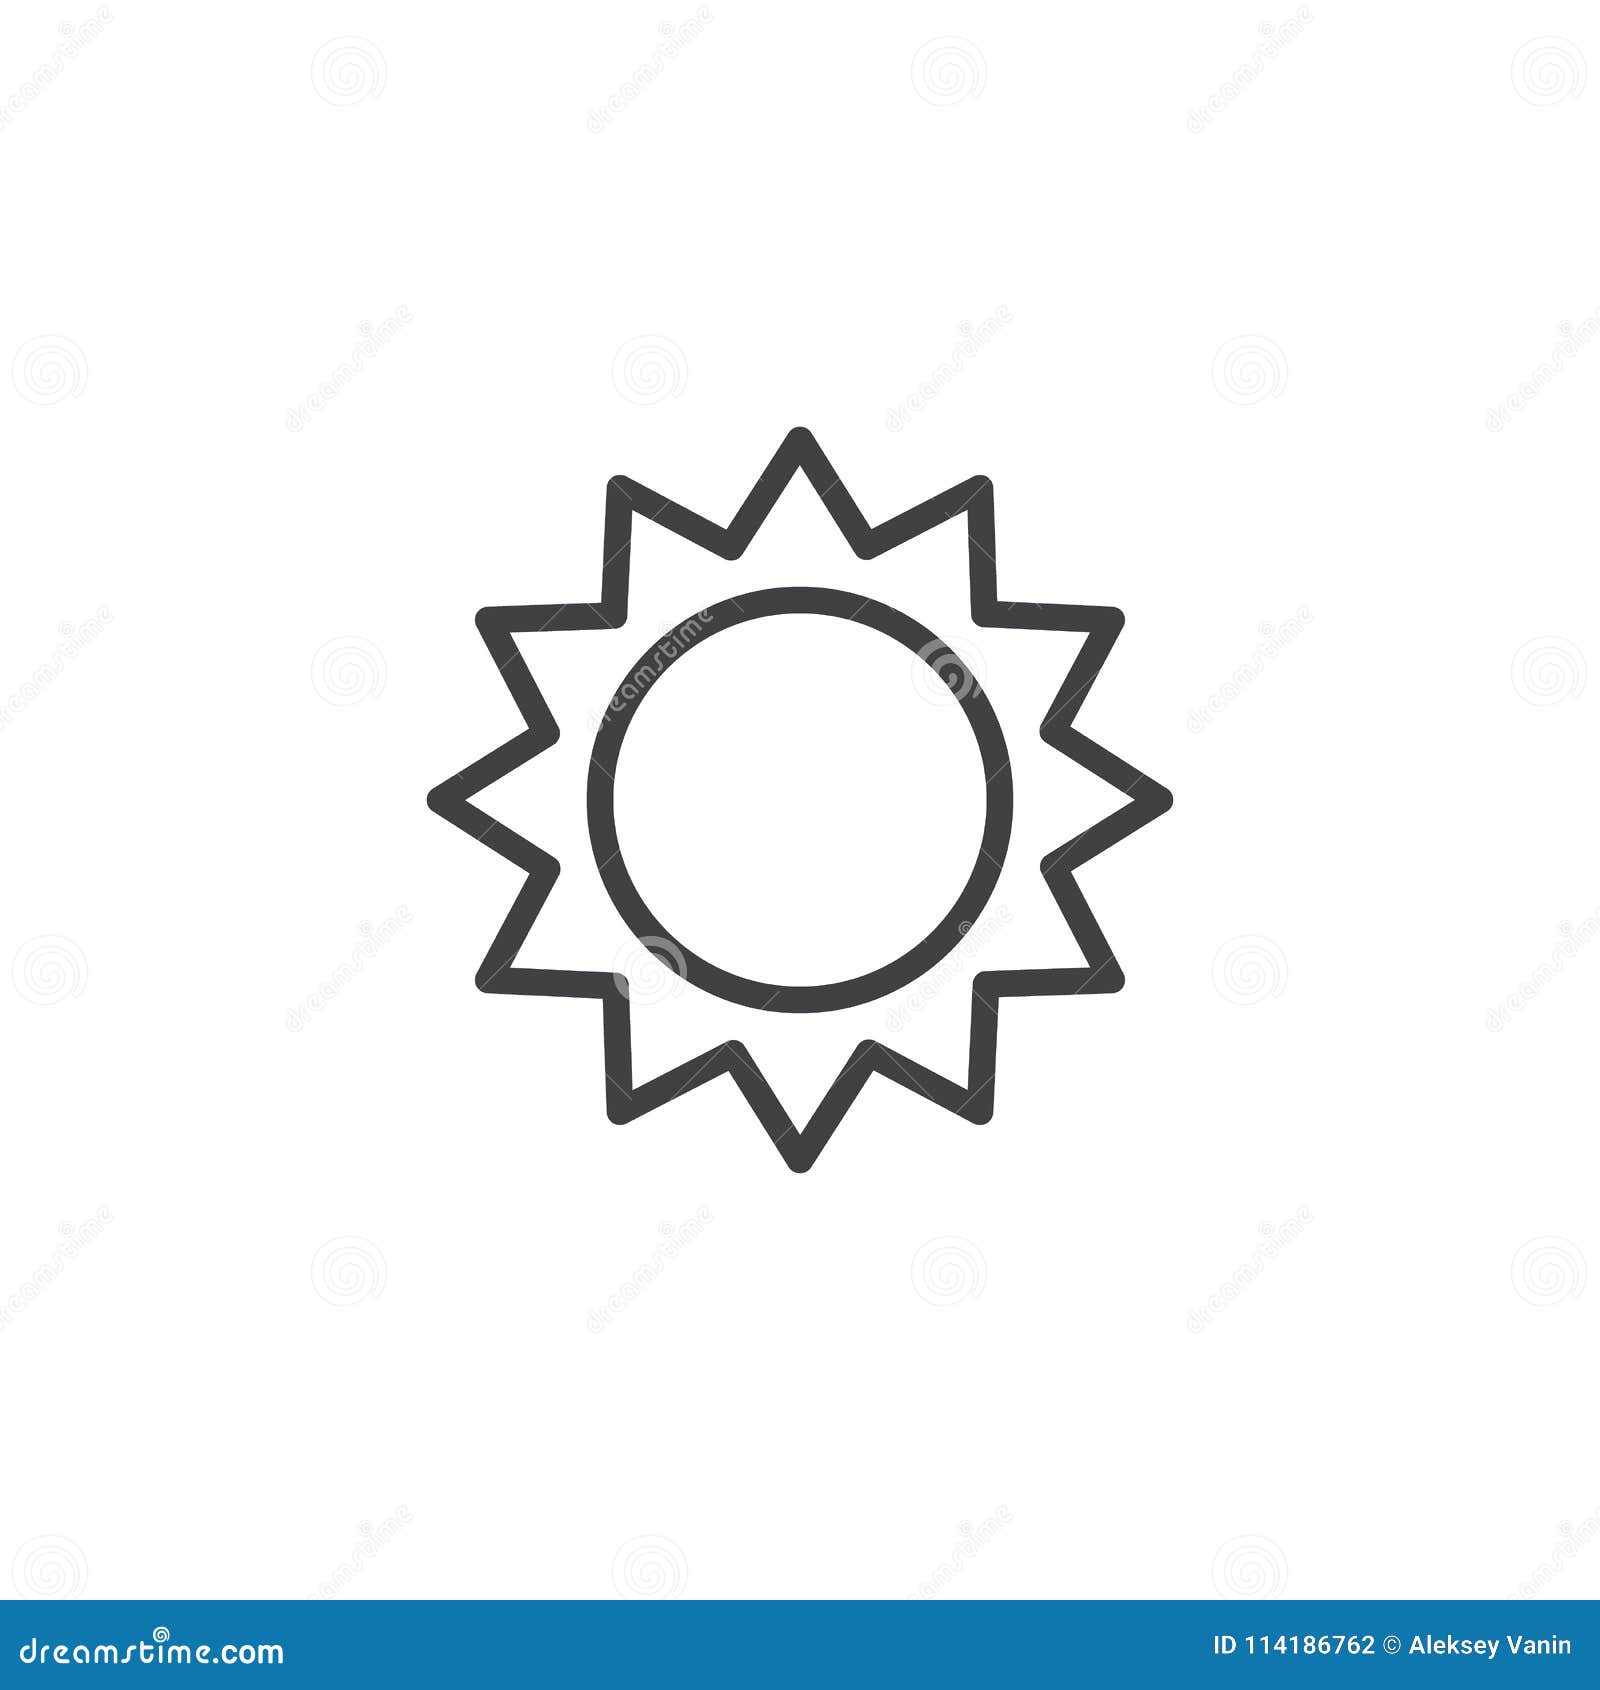 Sun outline icon stock vector. Illustration of spring - 114186762